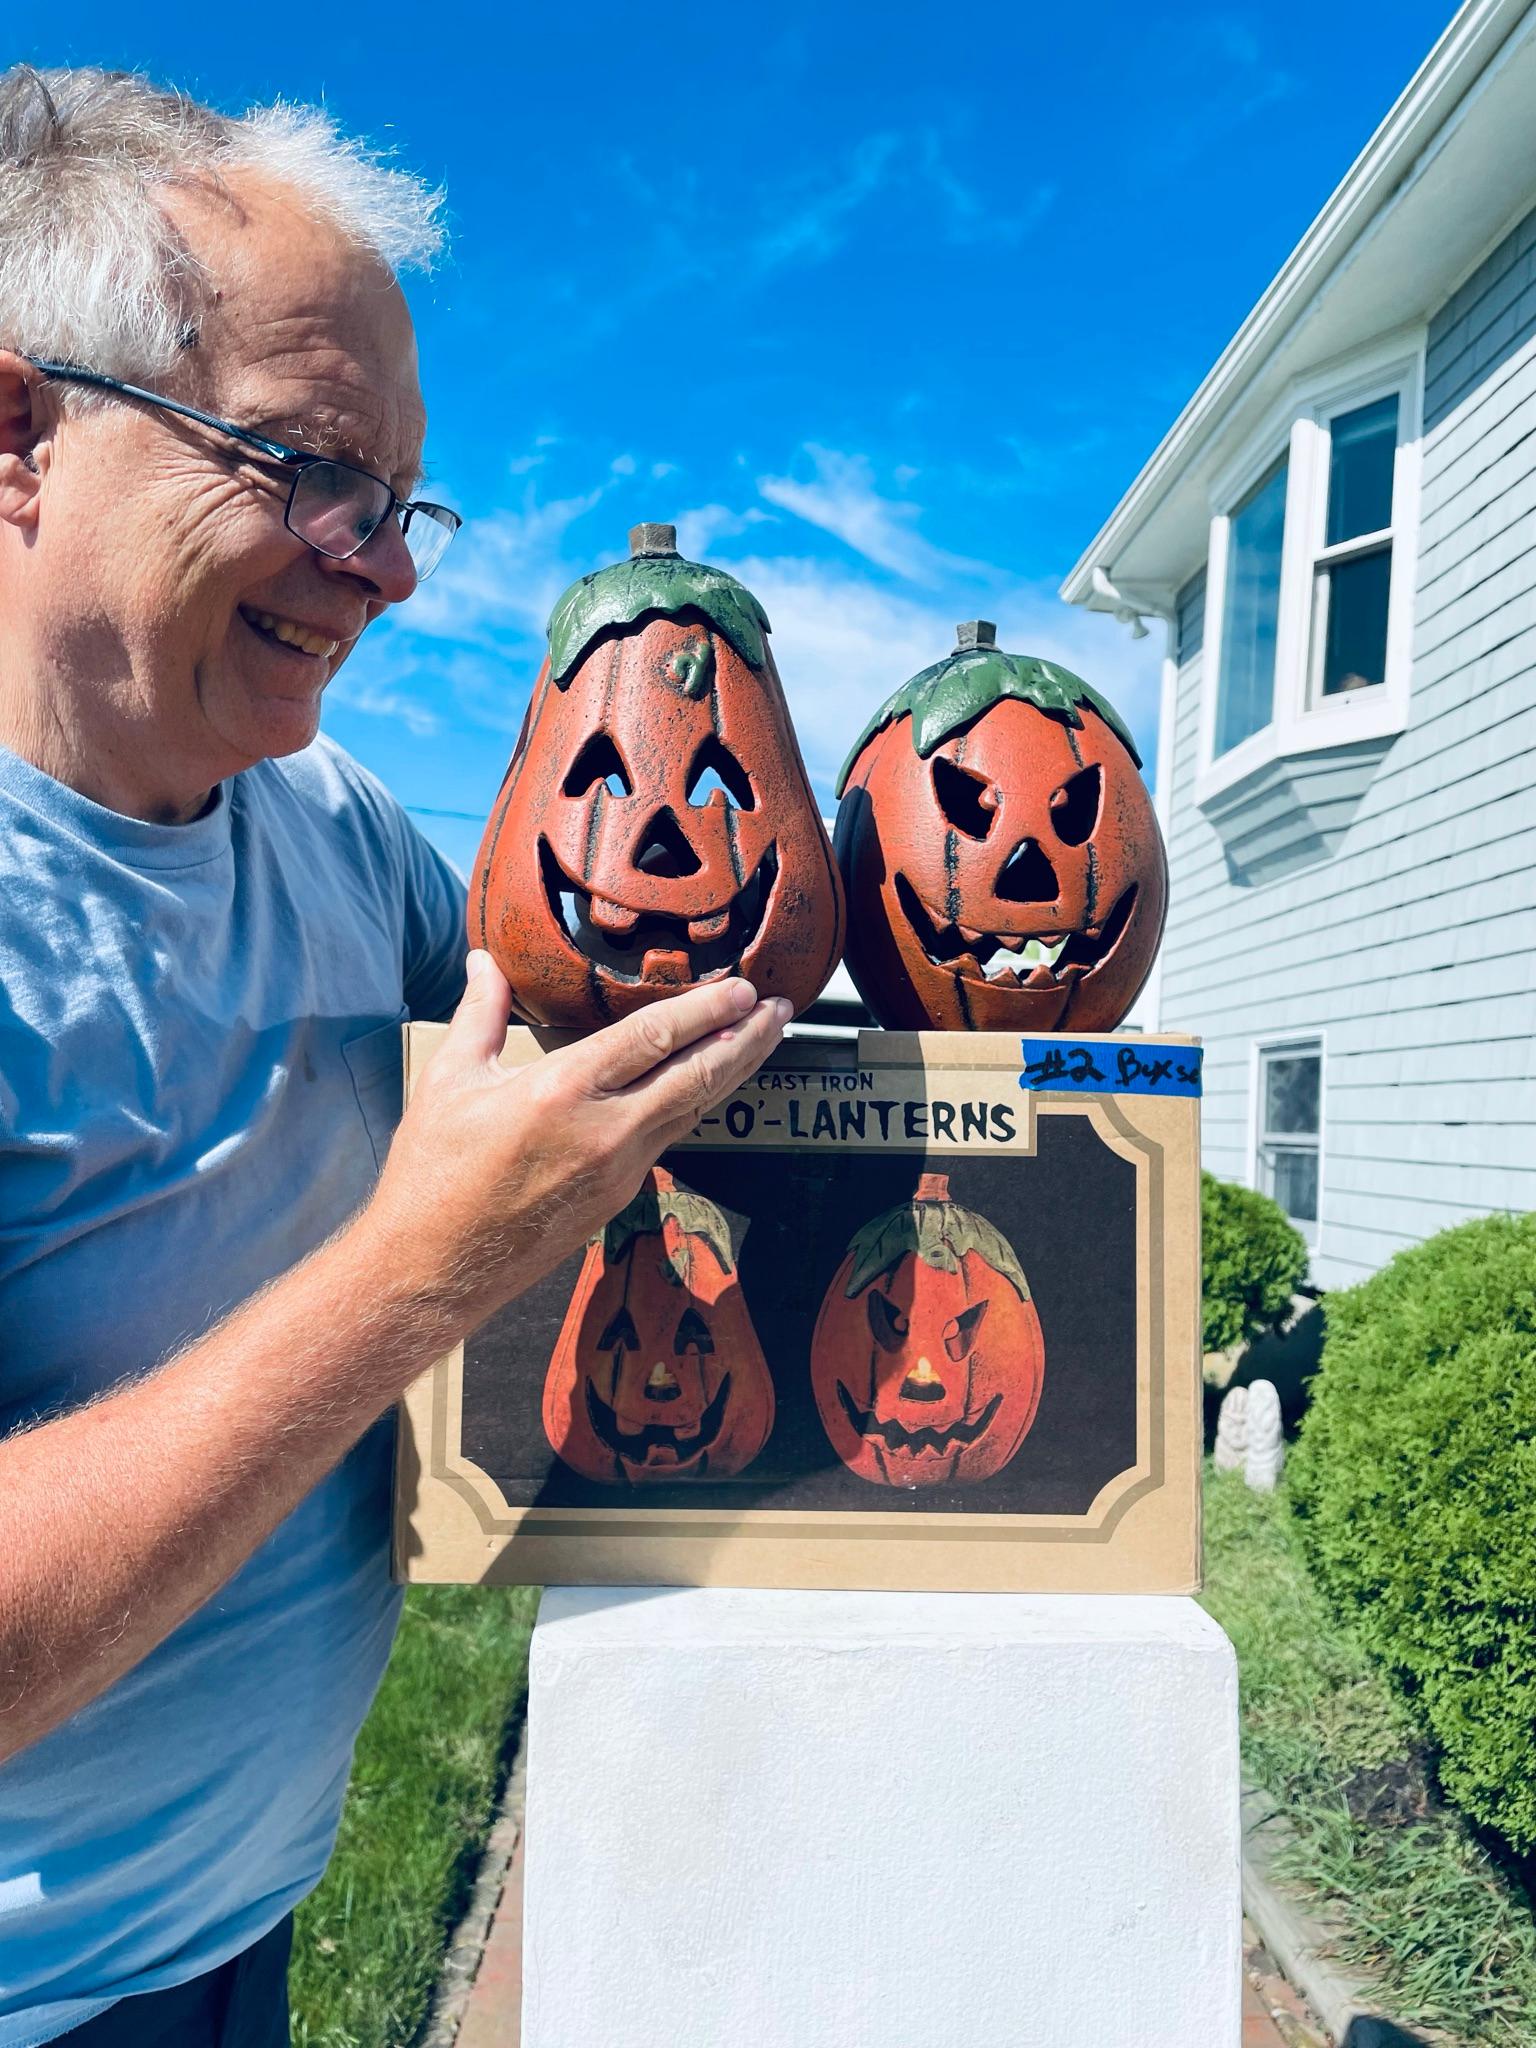 From our recent garden acquisitions- a happy pair with original box #2

Japan, this handsome pair (2) of quality vintage iron Halloween happy Jack-O-Lanterns with their friendly bi-faced designs and separate greenery toppers, (two charming faces